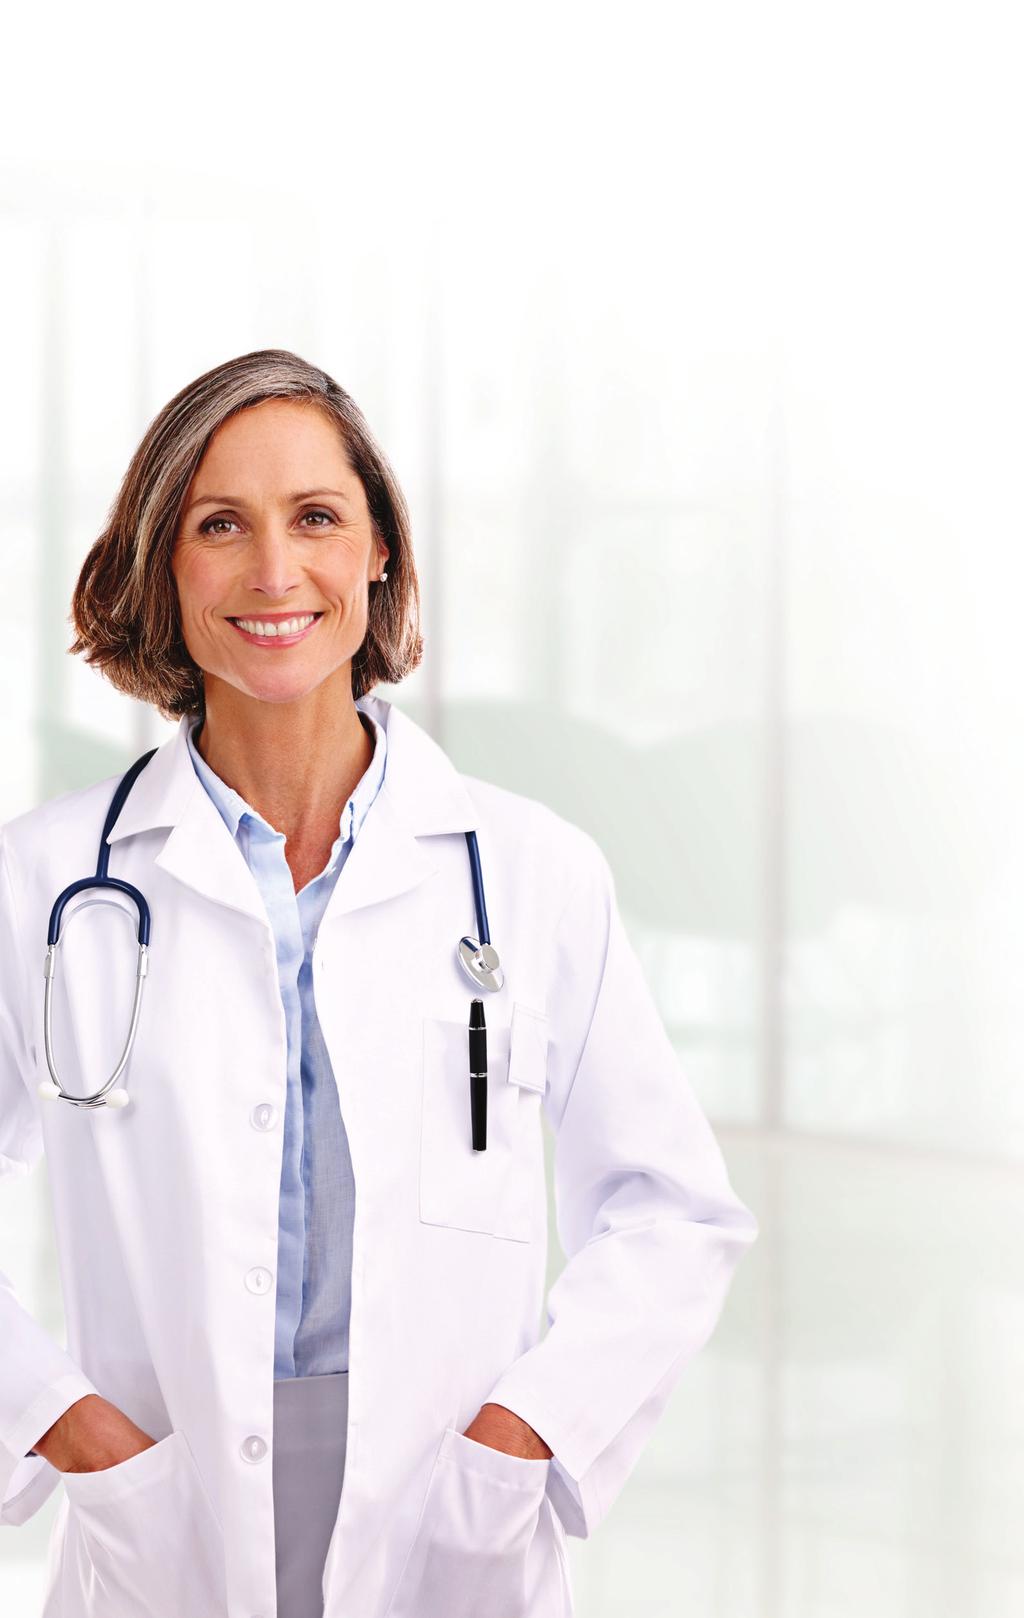 Elite-rated health care Sharp Health Plan has a family of providers and pharmacies close to where you live and work.